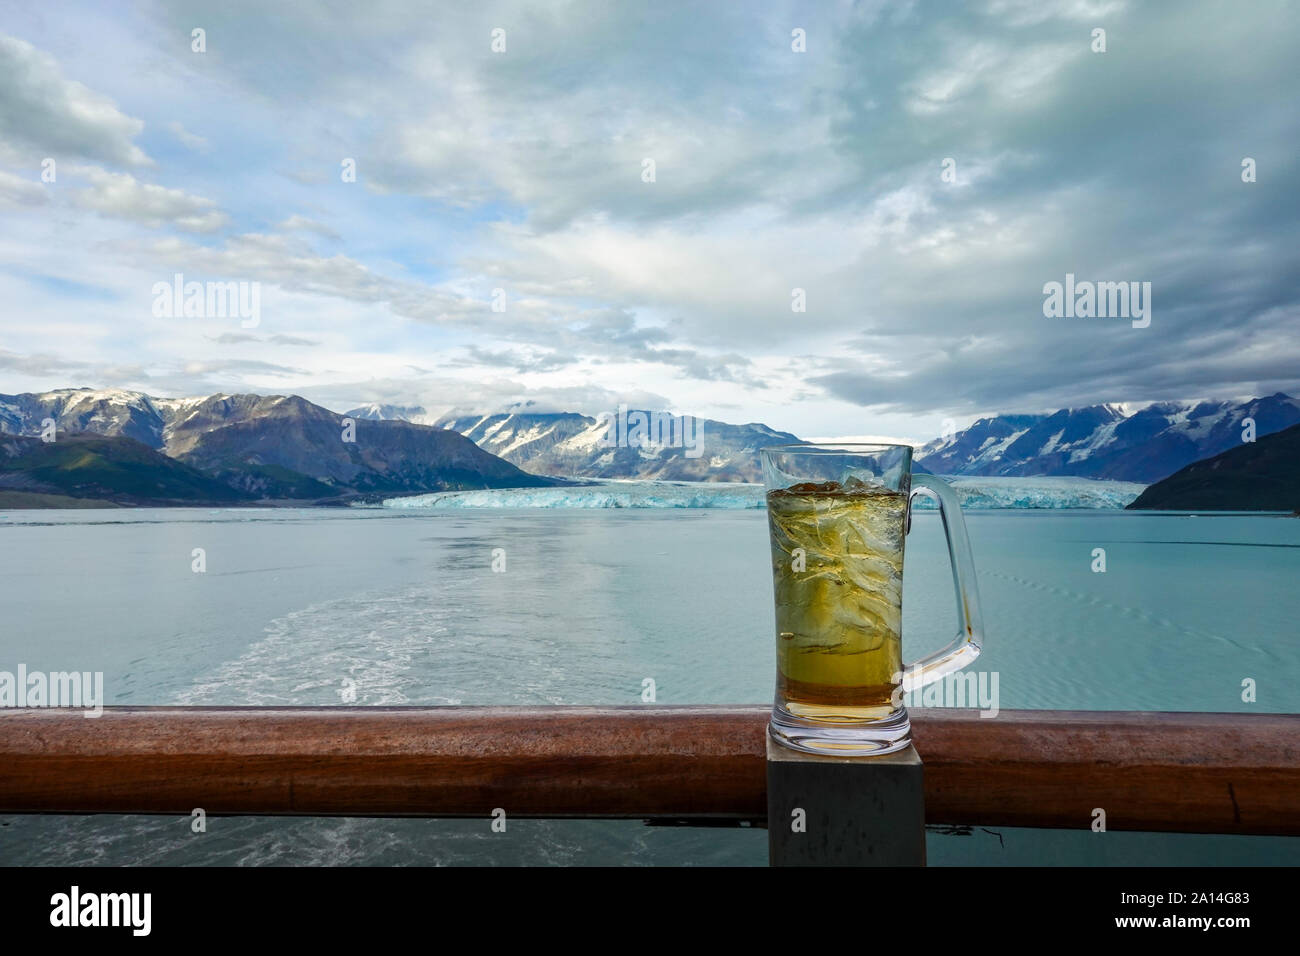 A glass of beer or beverage on the railing of a cruise ship while the ship is sailing away from the Hubbard Glacier. Stock Photo